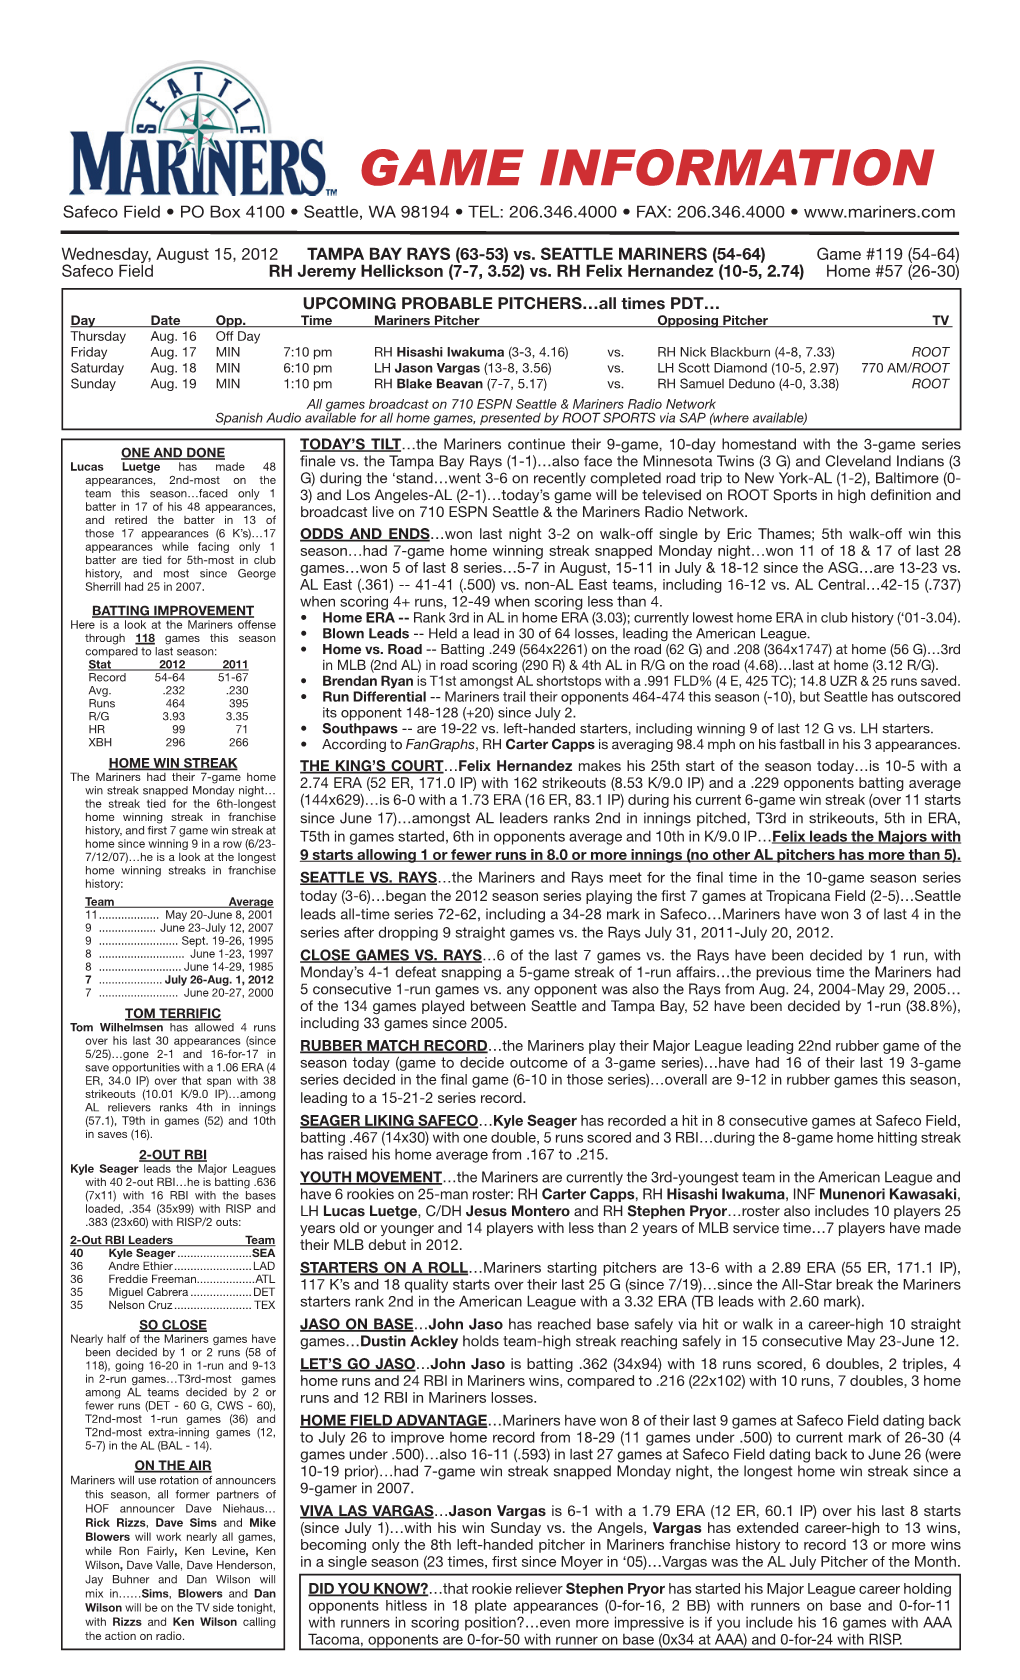 Mariners Game Notes • WEDNESDAY • AUGUST 15, 2012 • VS